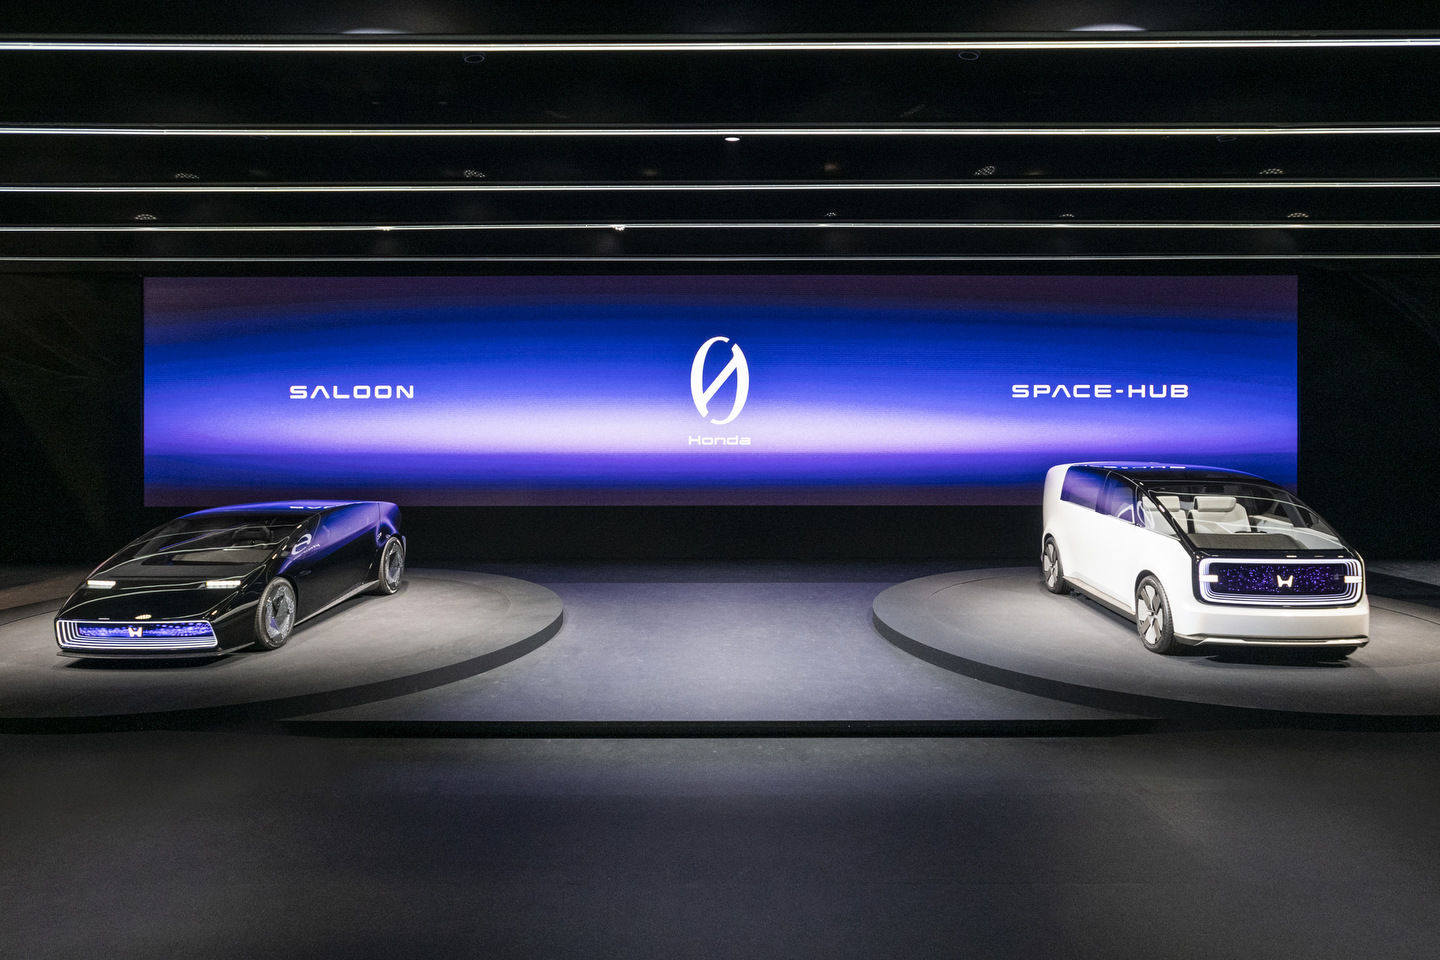 Honda Launches 'Honda 0' EV Series Featuring Groundbreaking Concepts at CES